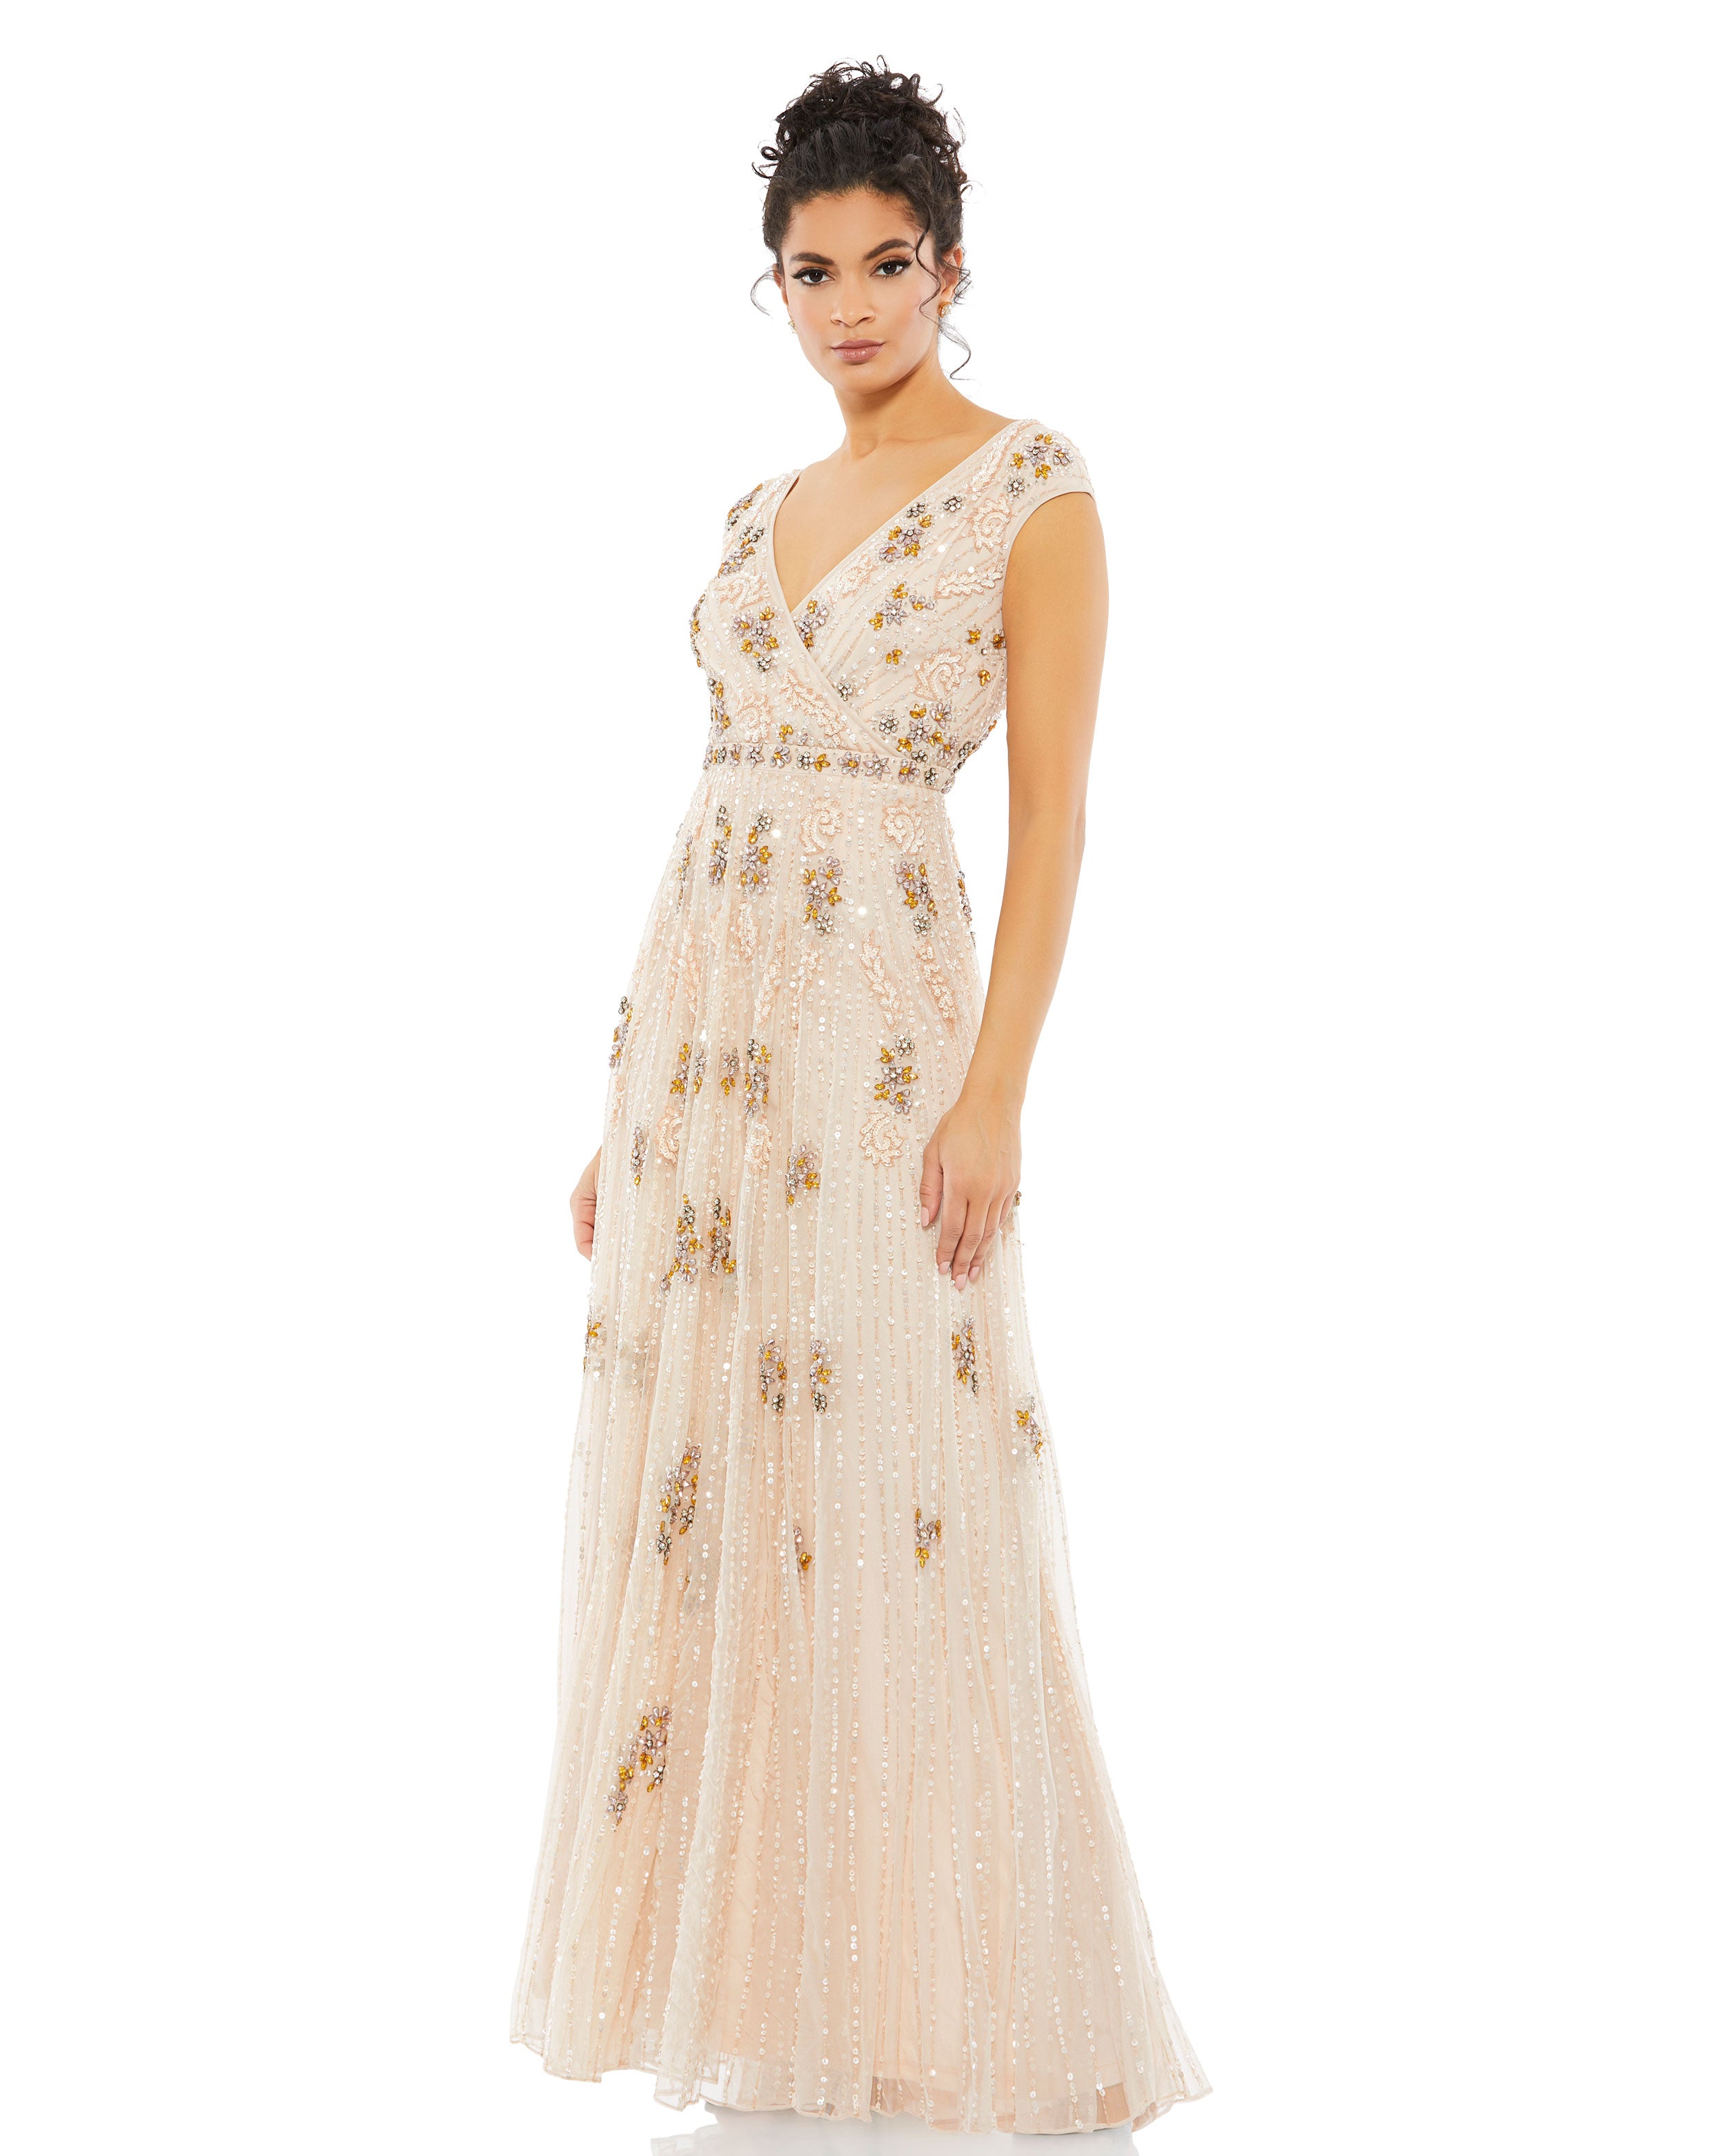 Embellished Wrap Over Cap Sleeve A-Line Gown